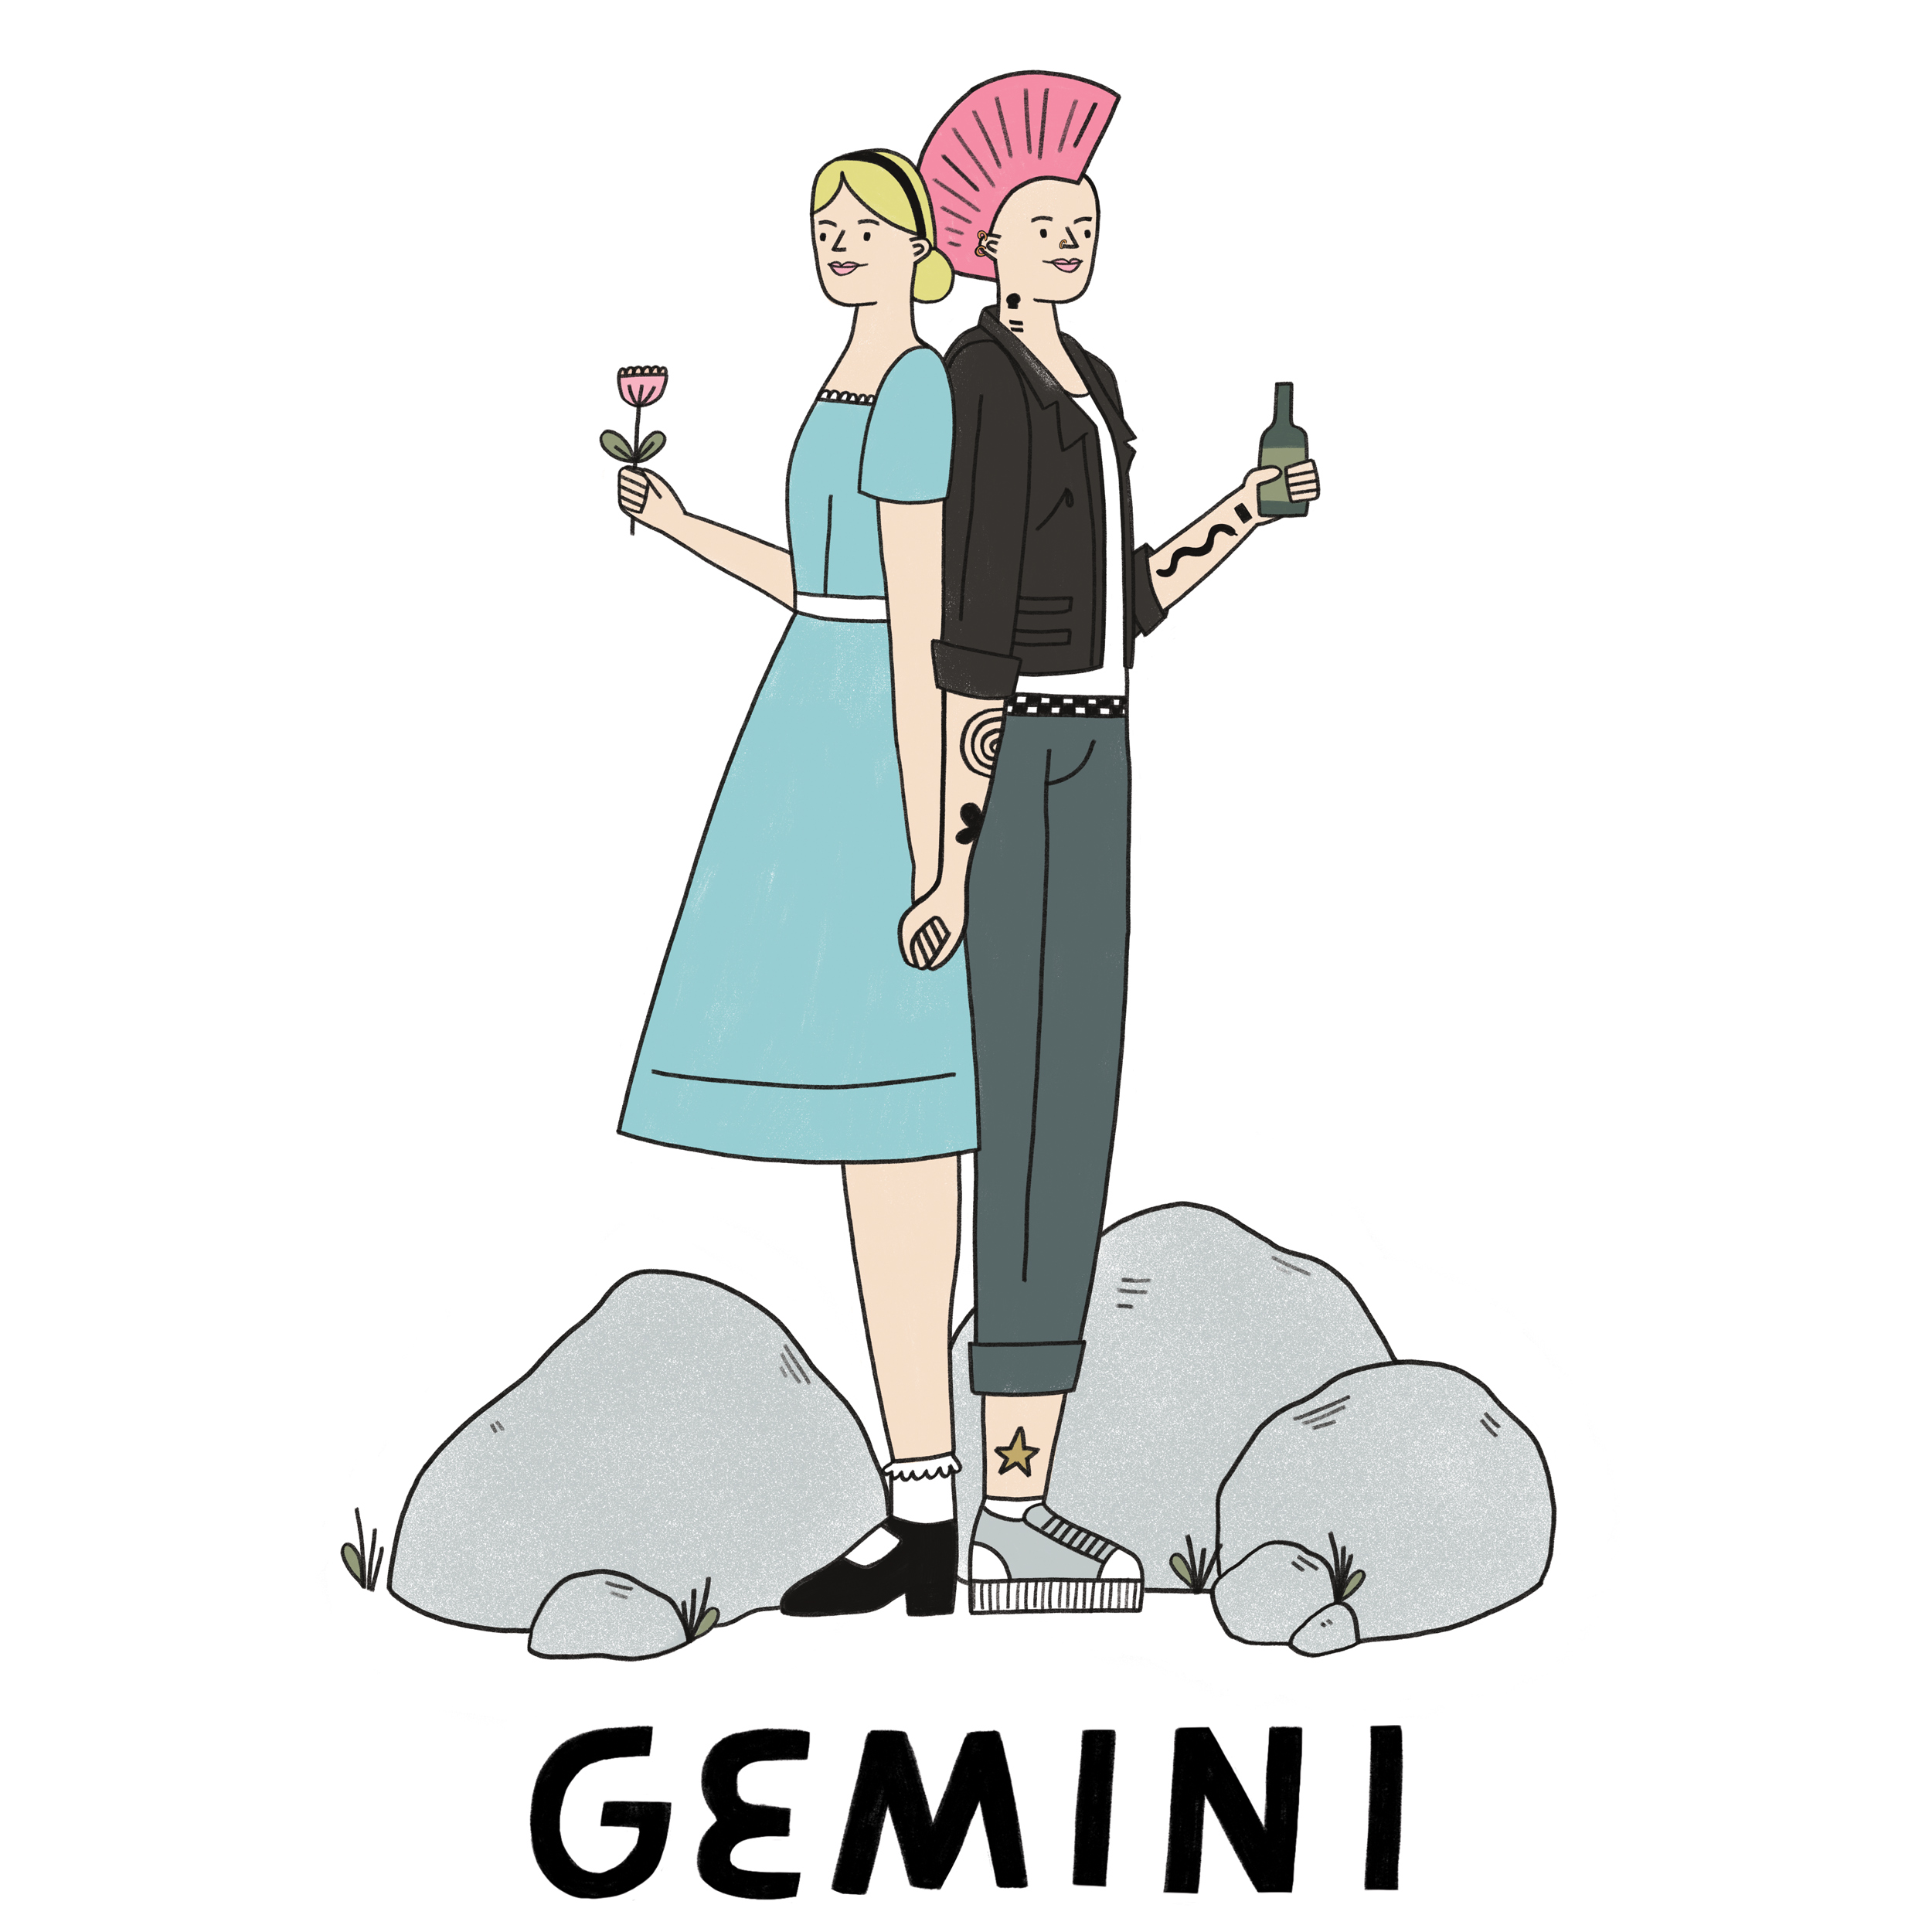 Gemini is often referred to as a Twin sign since they have dual personalities. 